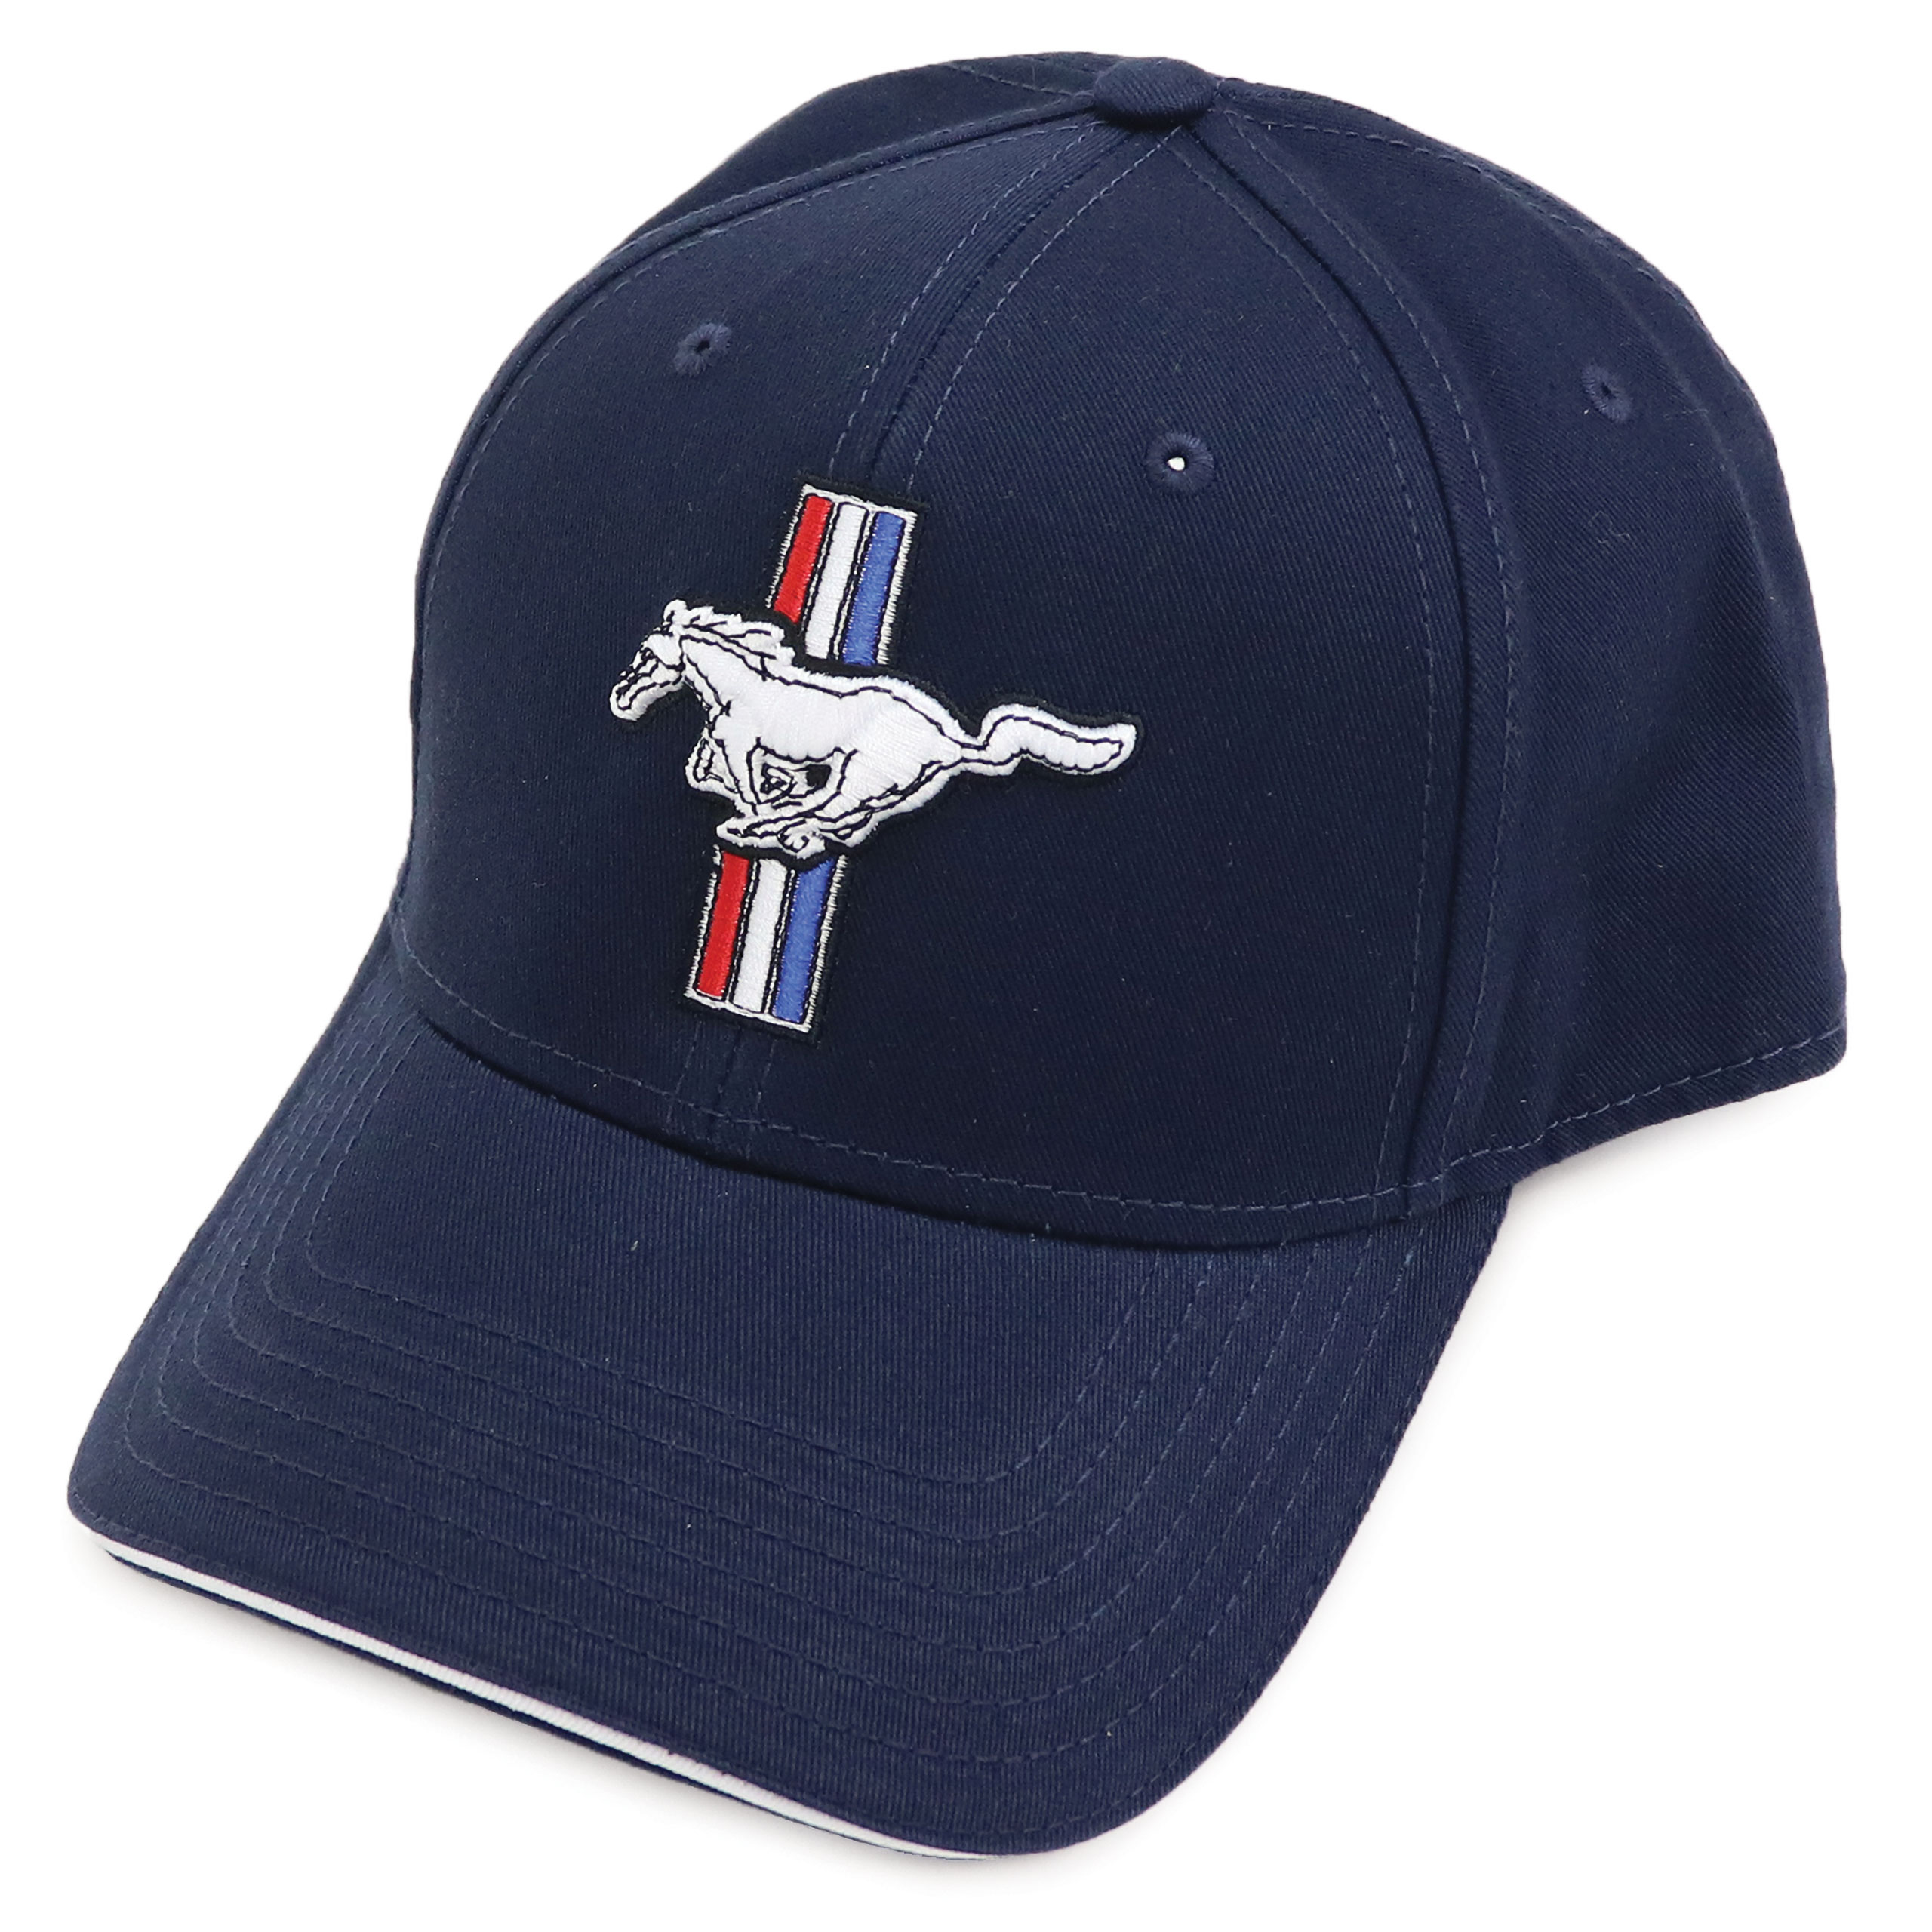 1964-2021 Ford Mustang Cap - Blue America Mustang Twill Logo - Cotton W/Pony Accessories of Auto